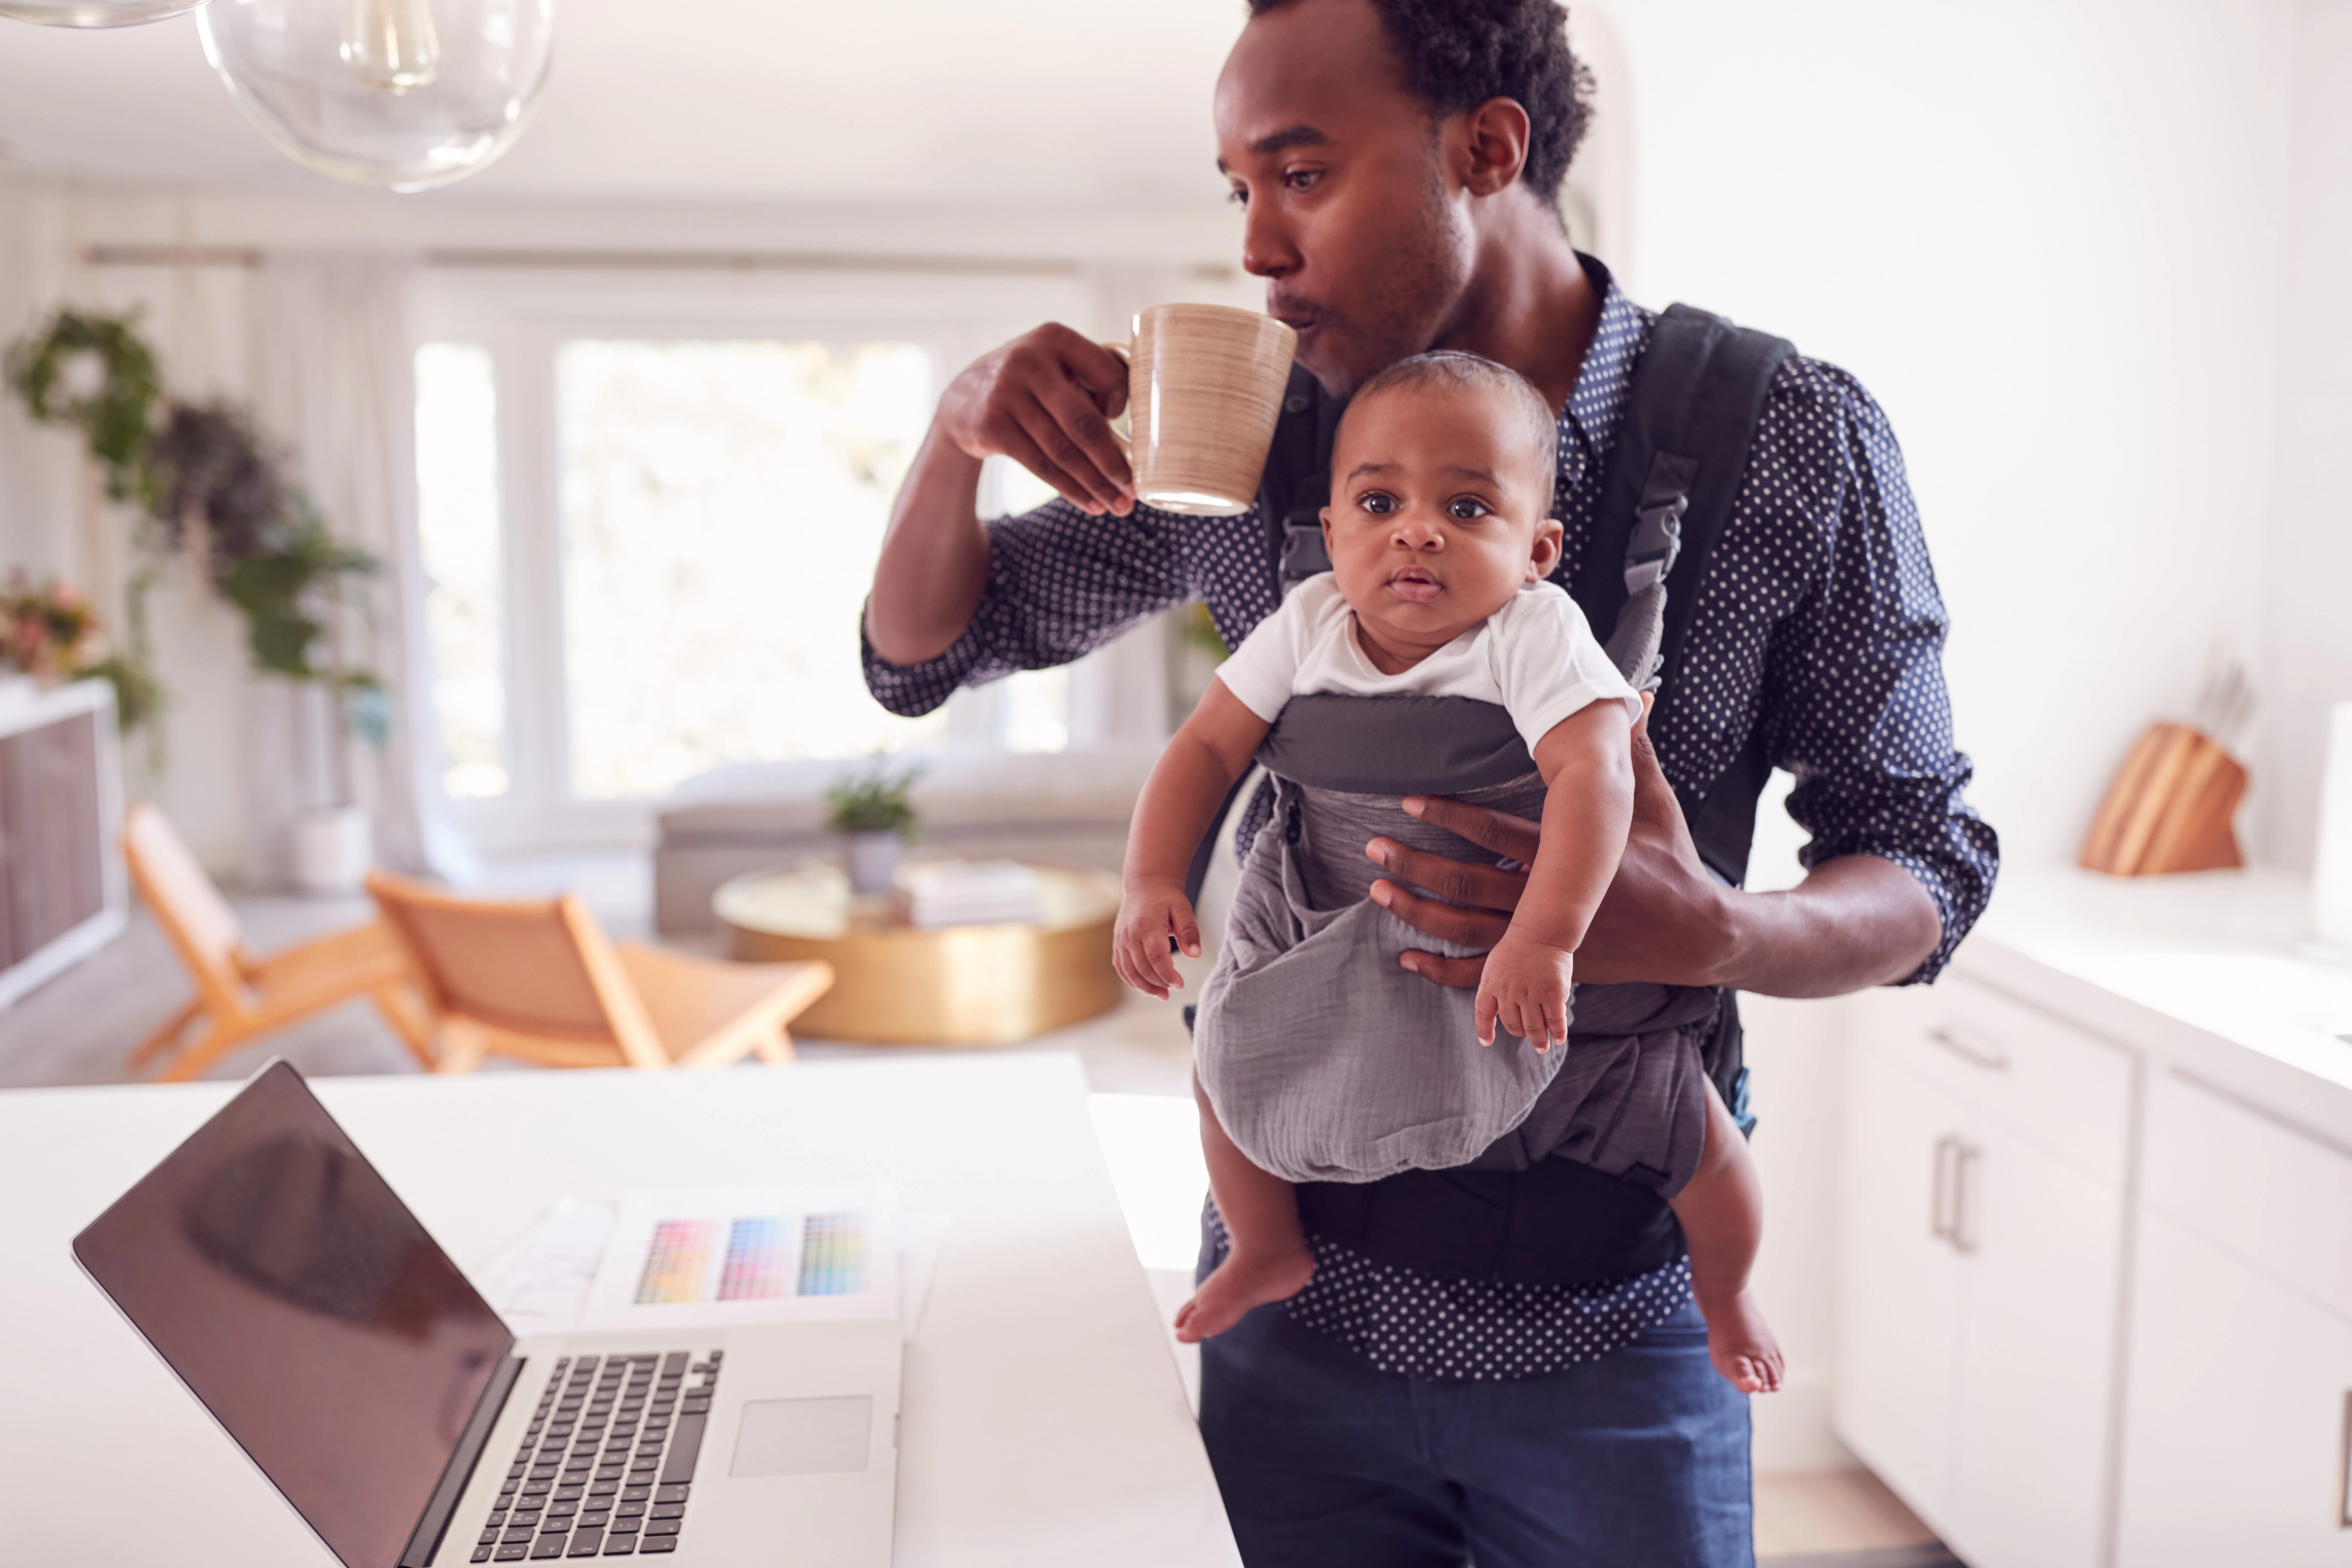 Childcare assistance is an employer-sponsored childcare benefits option that supports working parents by connecting them to quality, affordable caregivers.